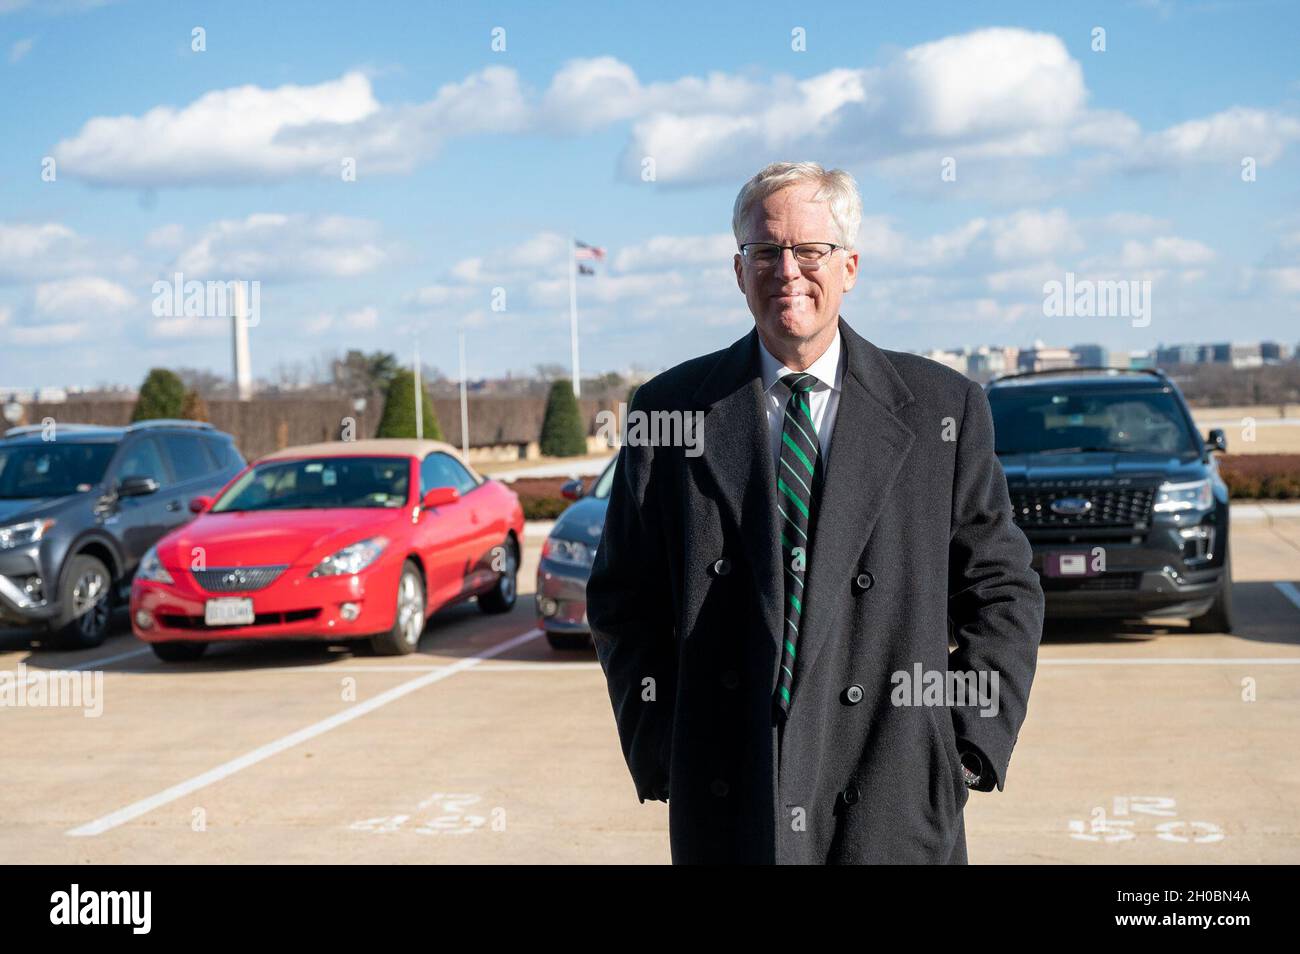 Outgoing Acting Defense Secretary Chris Miller poses for a photo as he departs the Pentagon during the administration transition, the Pentagon, Washington, D.C., Jan. 20, 2021. Stock Photo